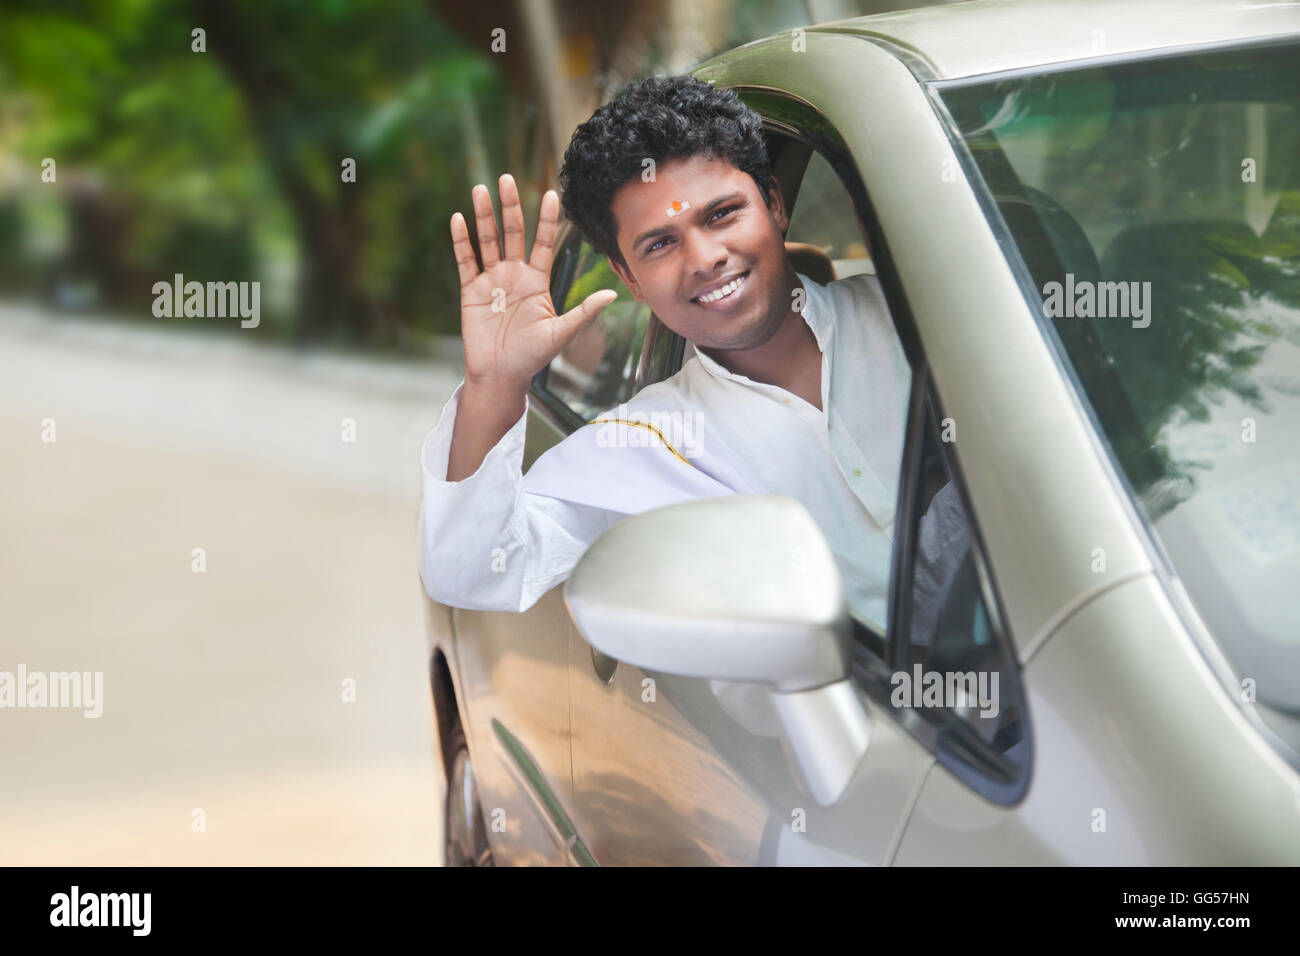 Portrait of smiling South Indian man waving out of car window Stock Photo